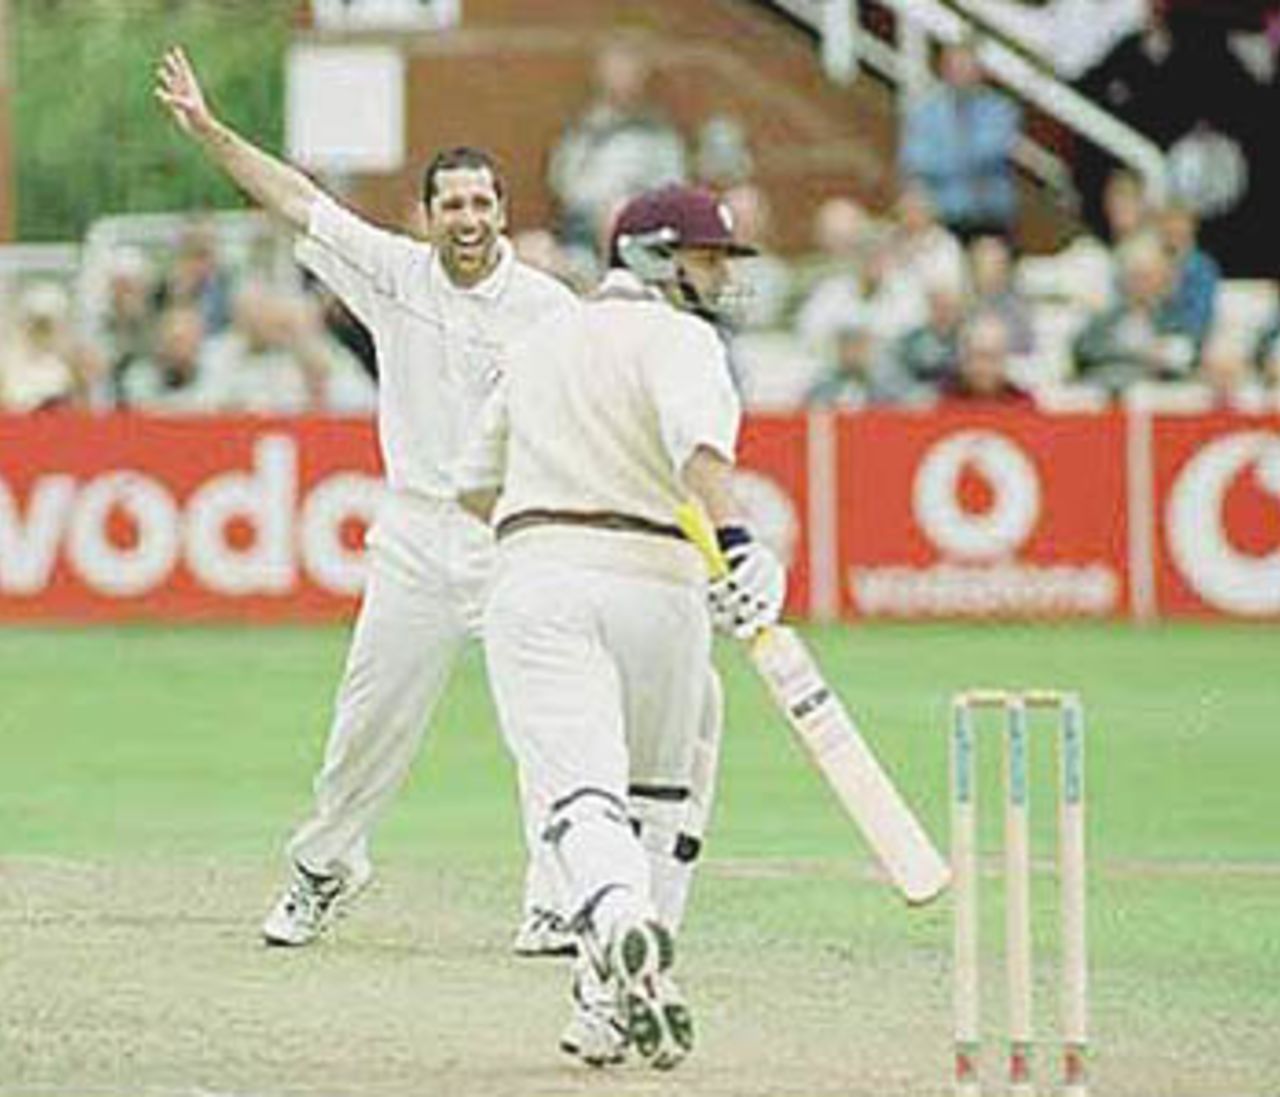 Joe Scuderi celebrates after taking the wicket of Lathwell, PPP healthcare County Championship Division One, 2000, Somerset v Lancashire, County Ground, Taunton, 12-15 July 2000(Day 2).